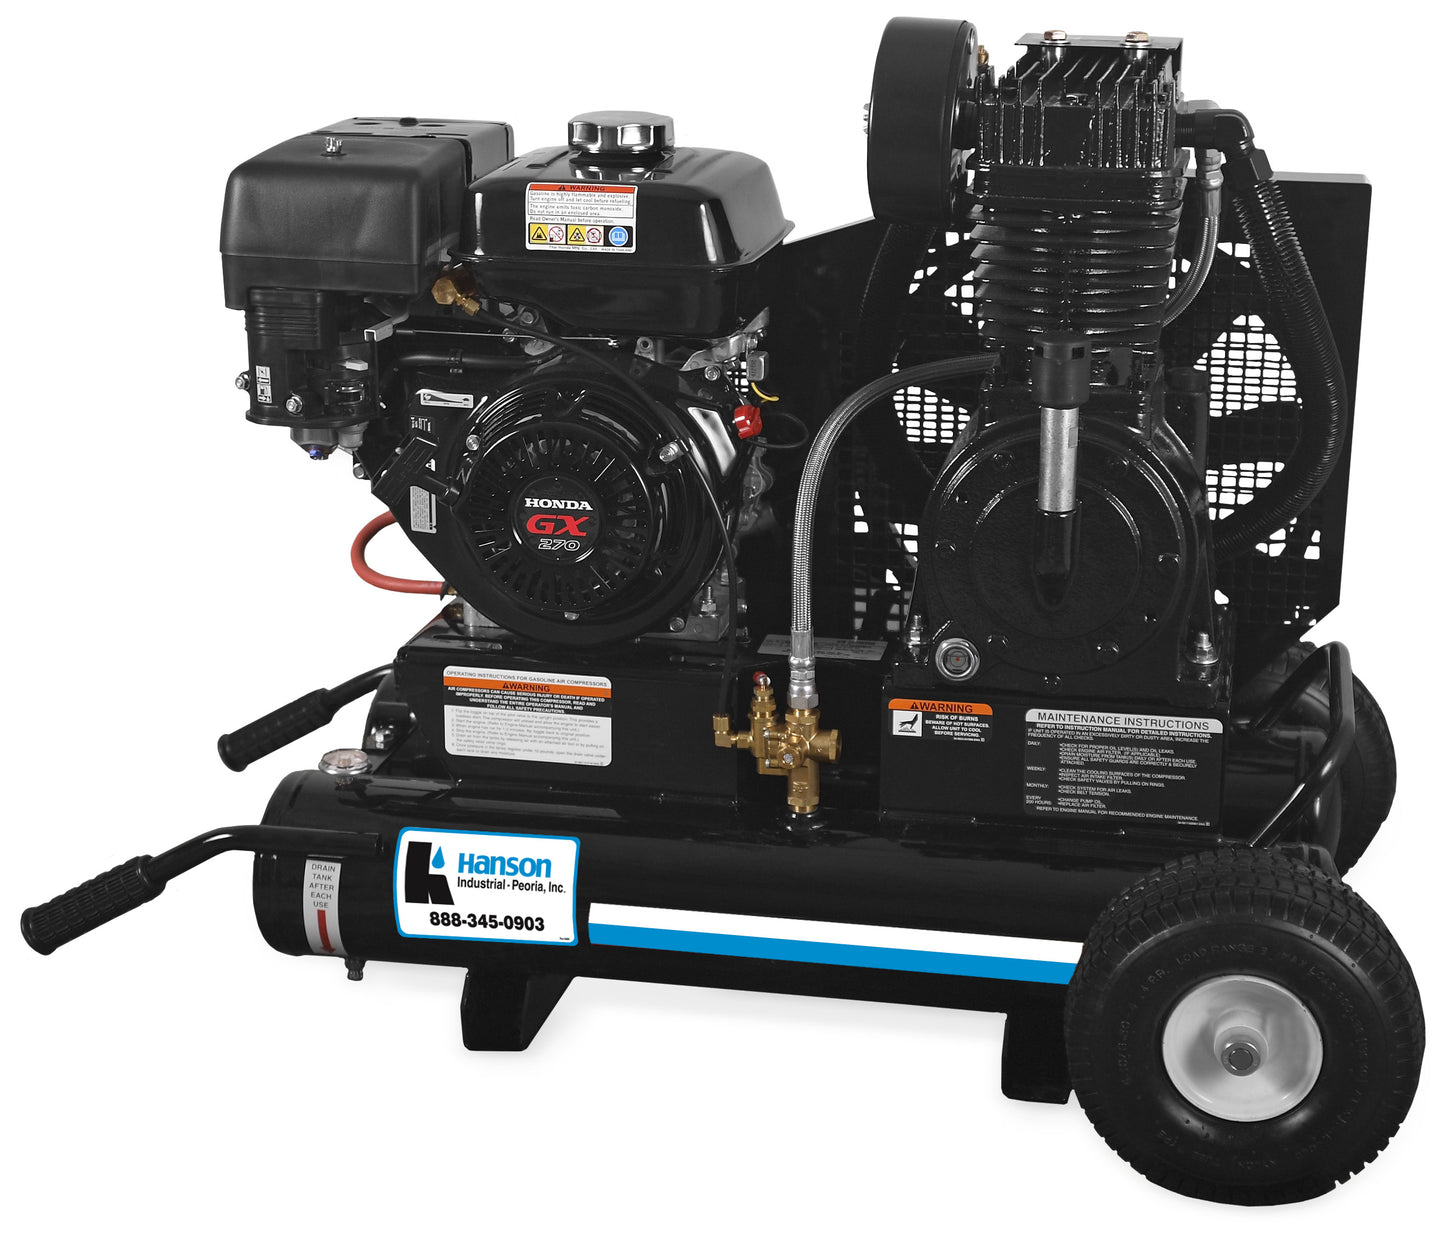 Hanson Work Pro® Series 8-Gallon Single or Two Stage Electric or Gasoline Air Compressor